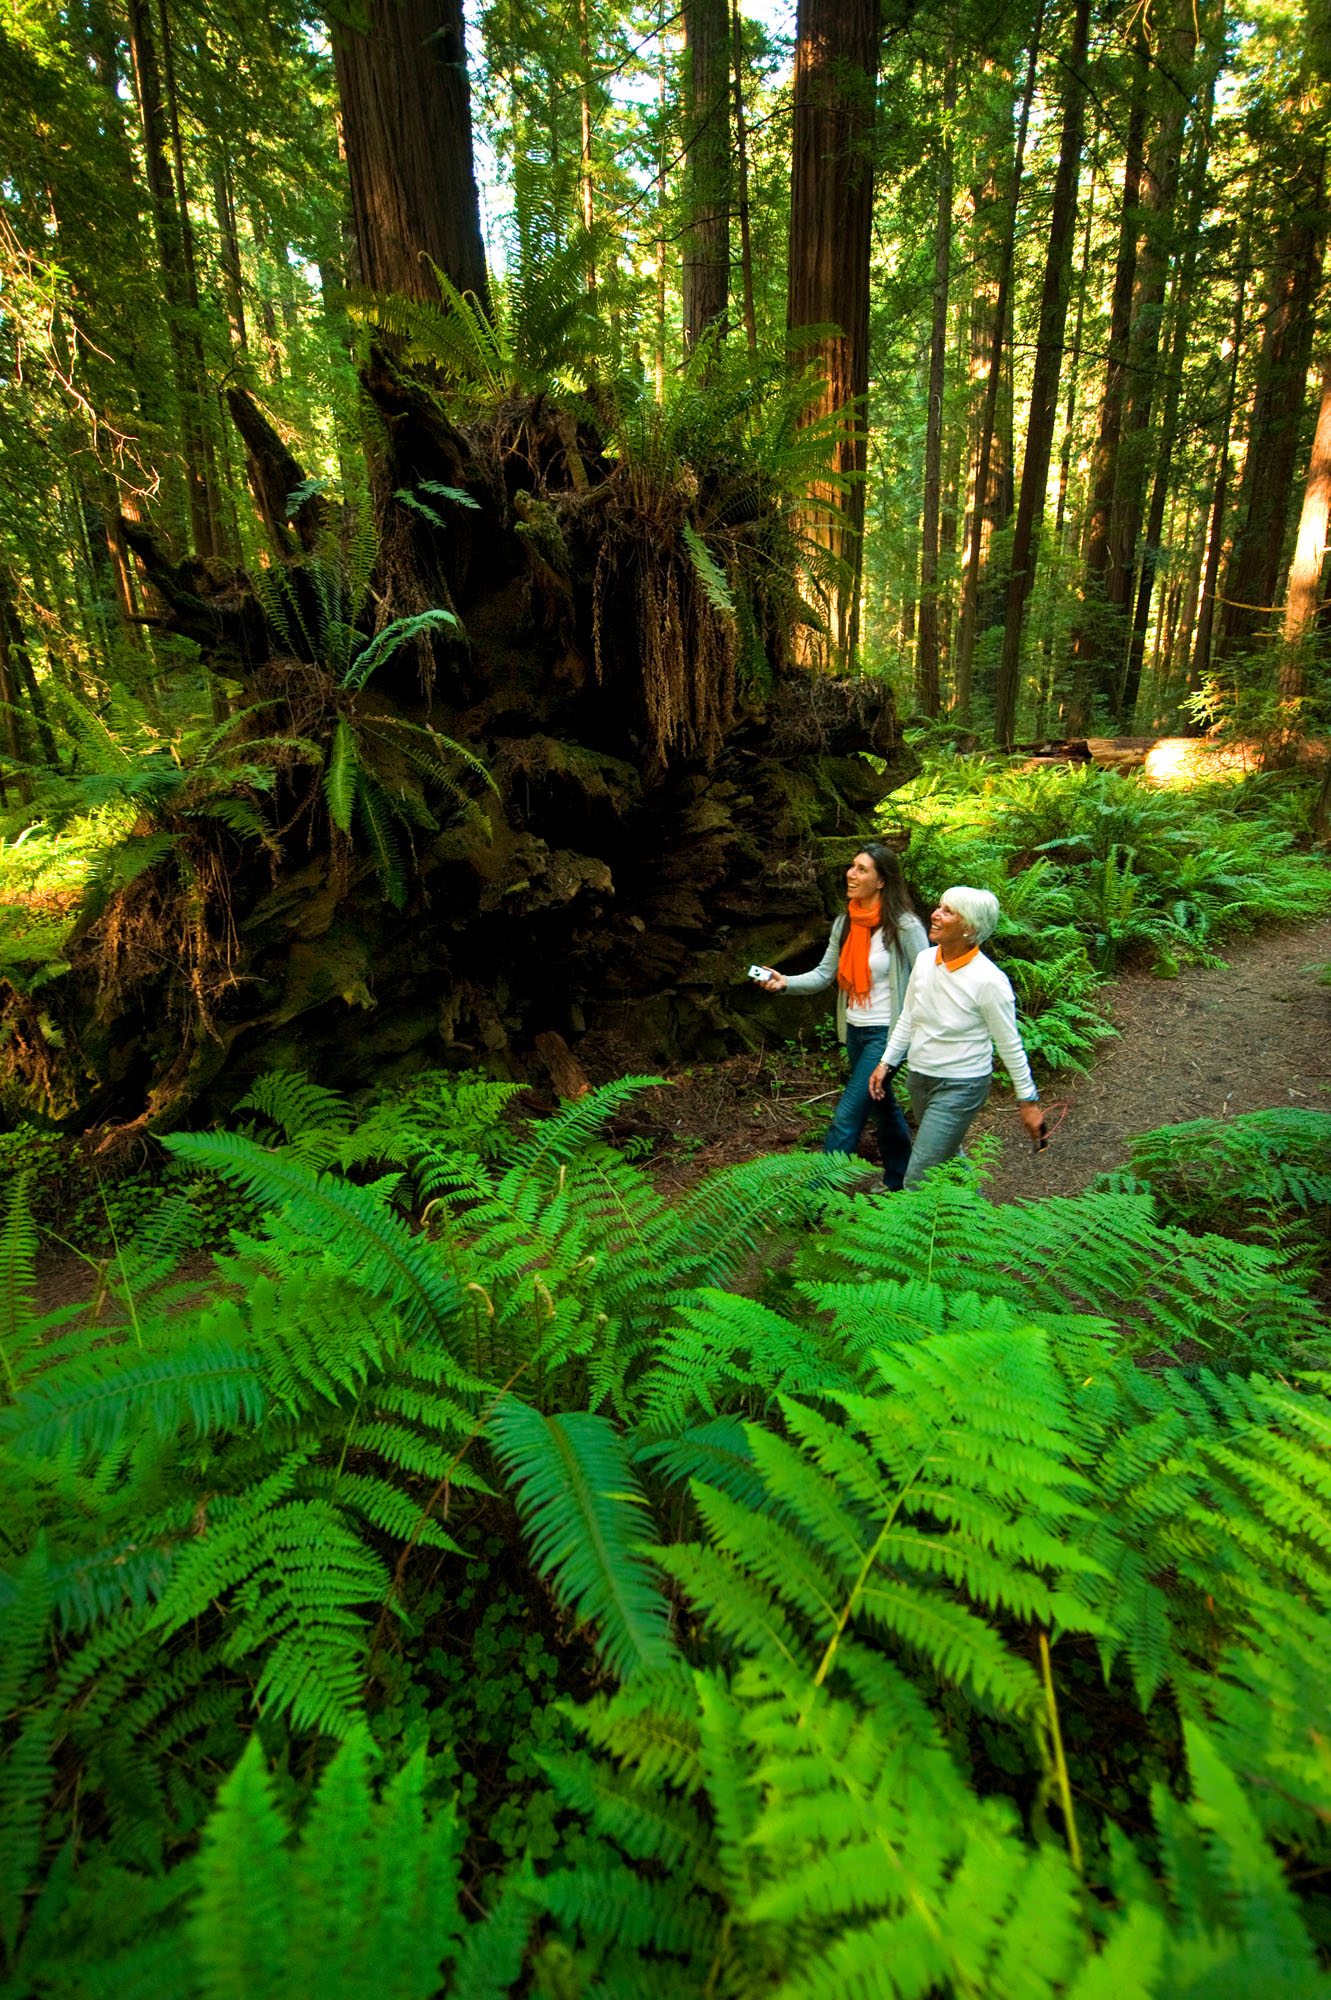 With ferns in the foreground, two women look into the canopy as they hike along a dirt trail